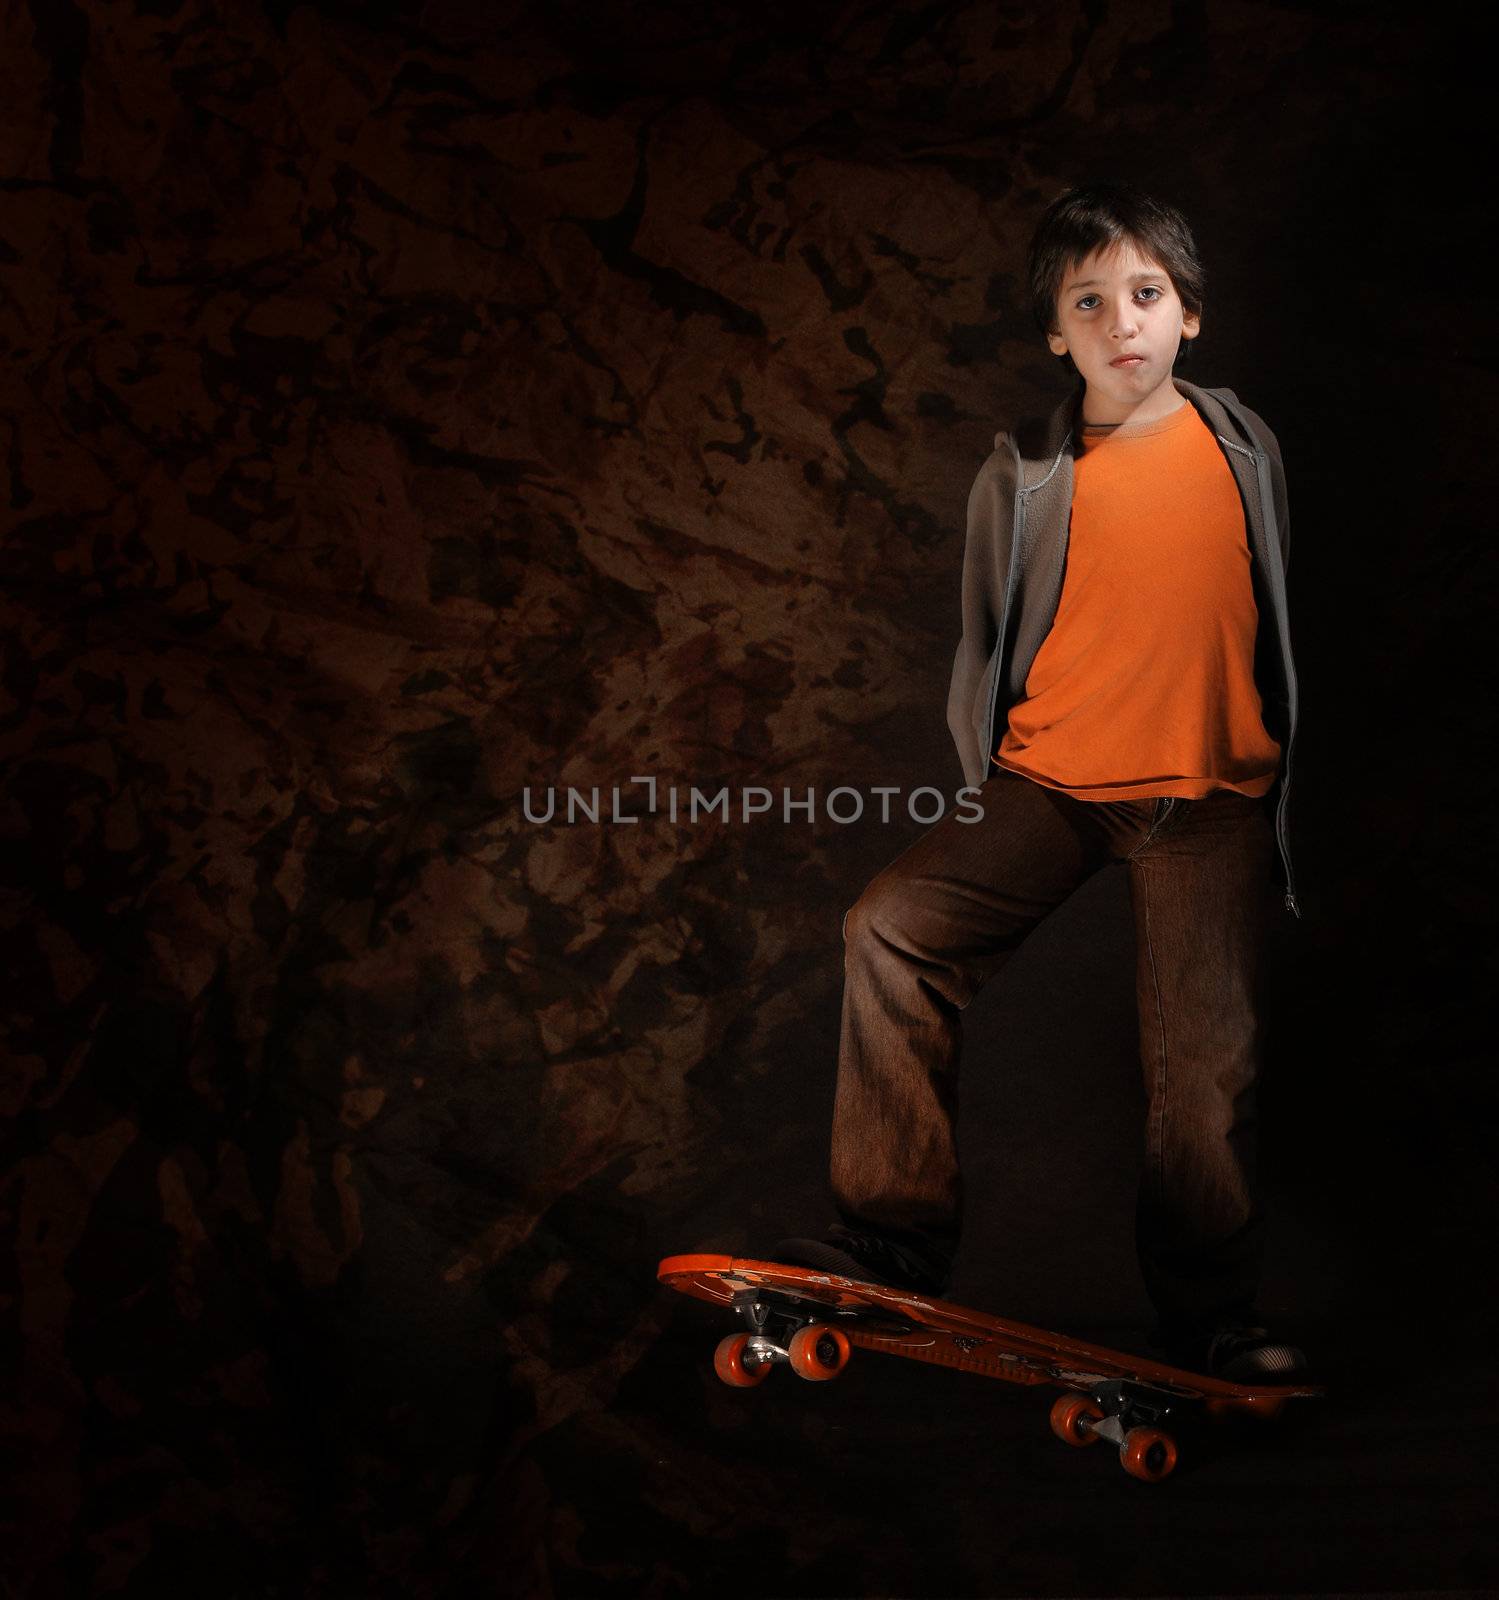 Skater boy with a cool attitude. Grunge style by Erdosain